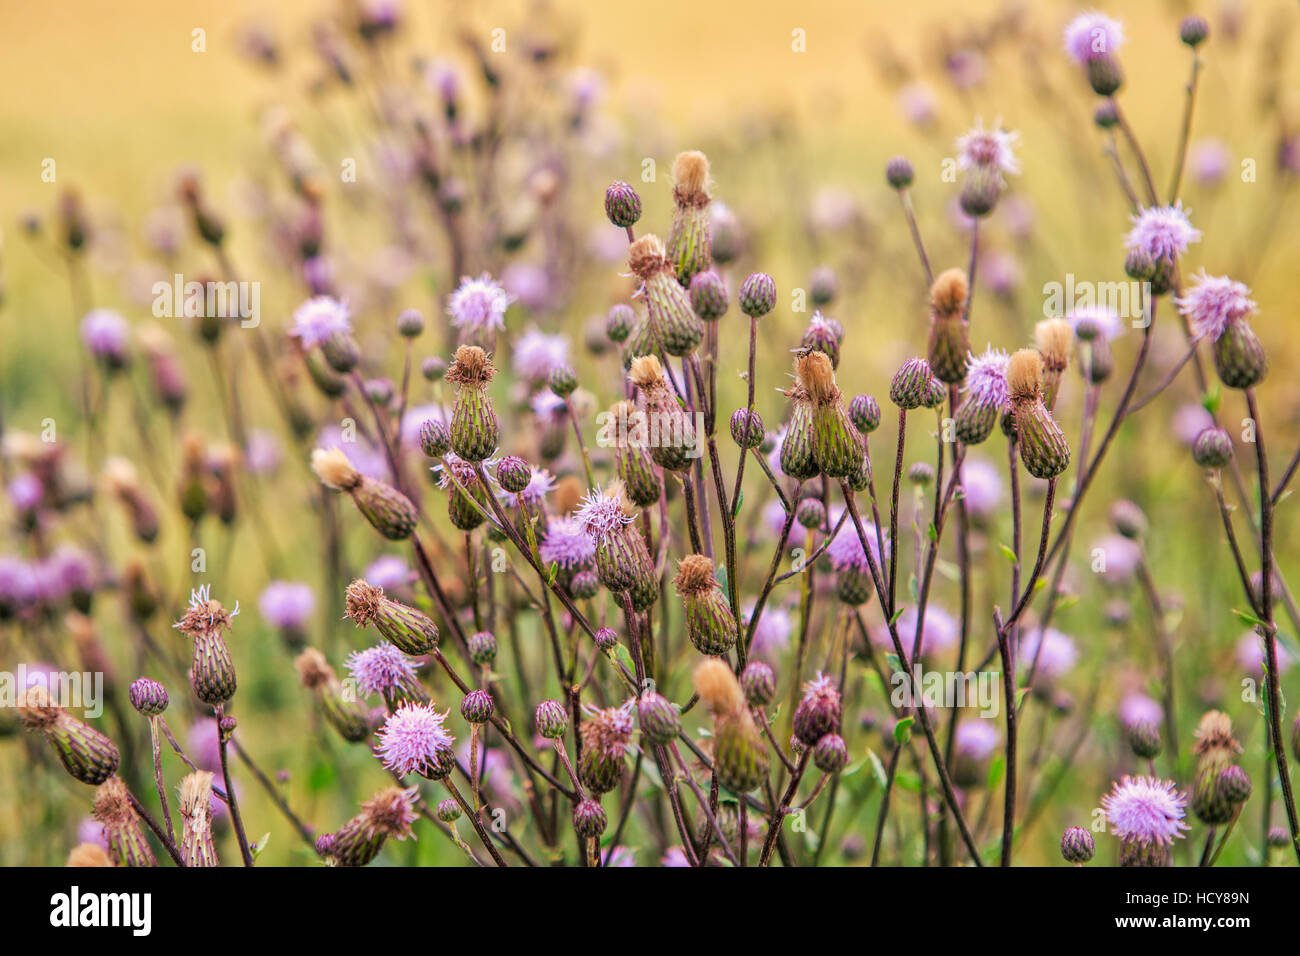 Field with thistle - Creeping Thistle, also known as a Field Thistle (Cirsium arvense) Stock Photo